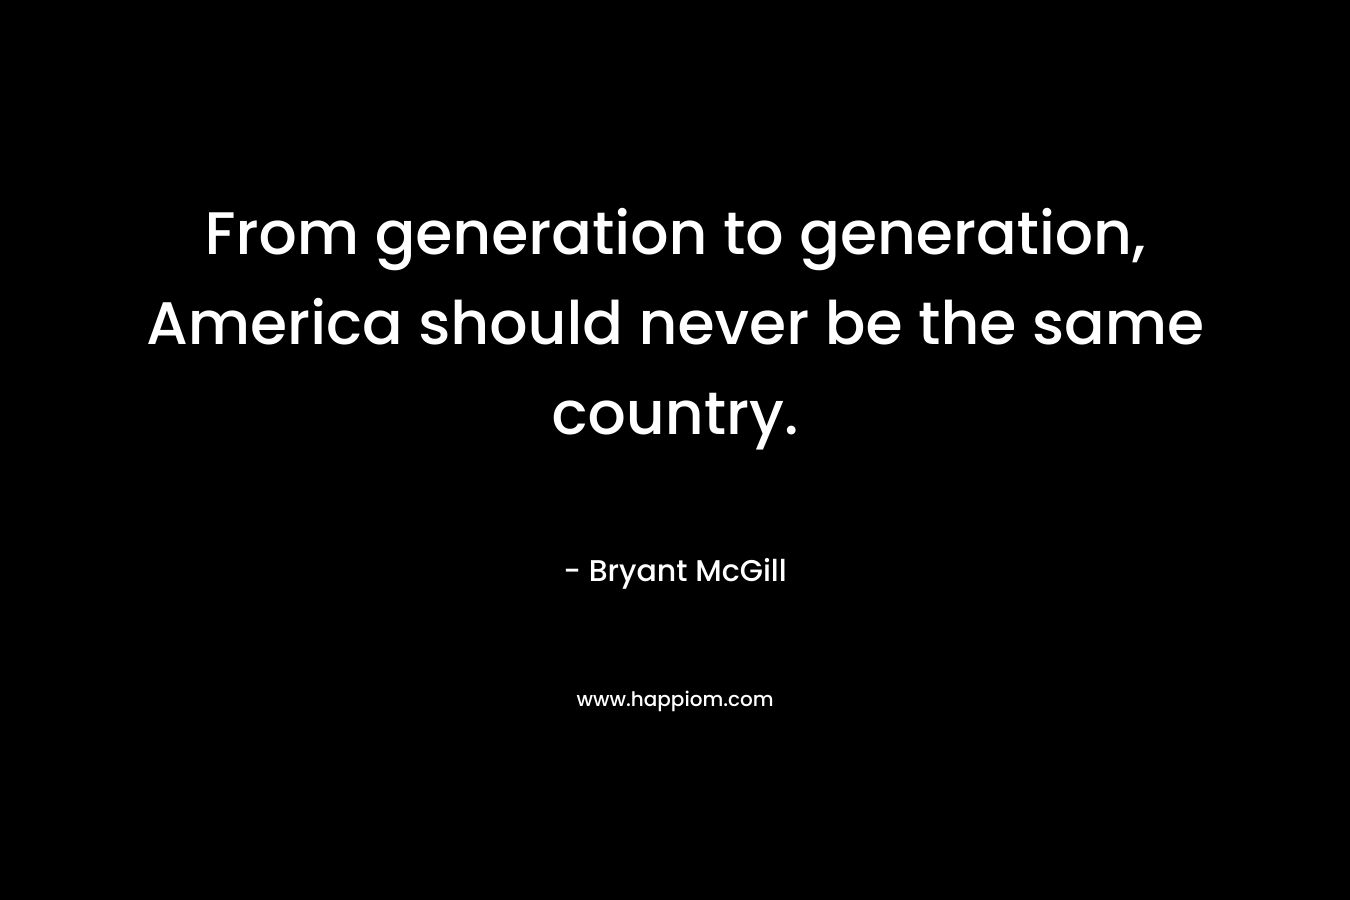 From generation to generation, America should never be the same country.